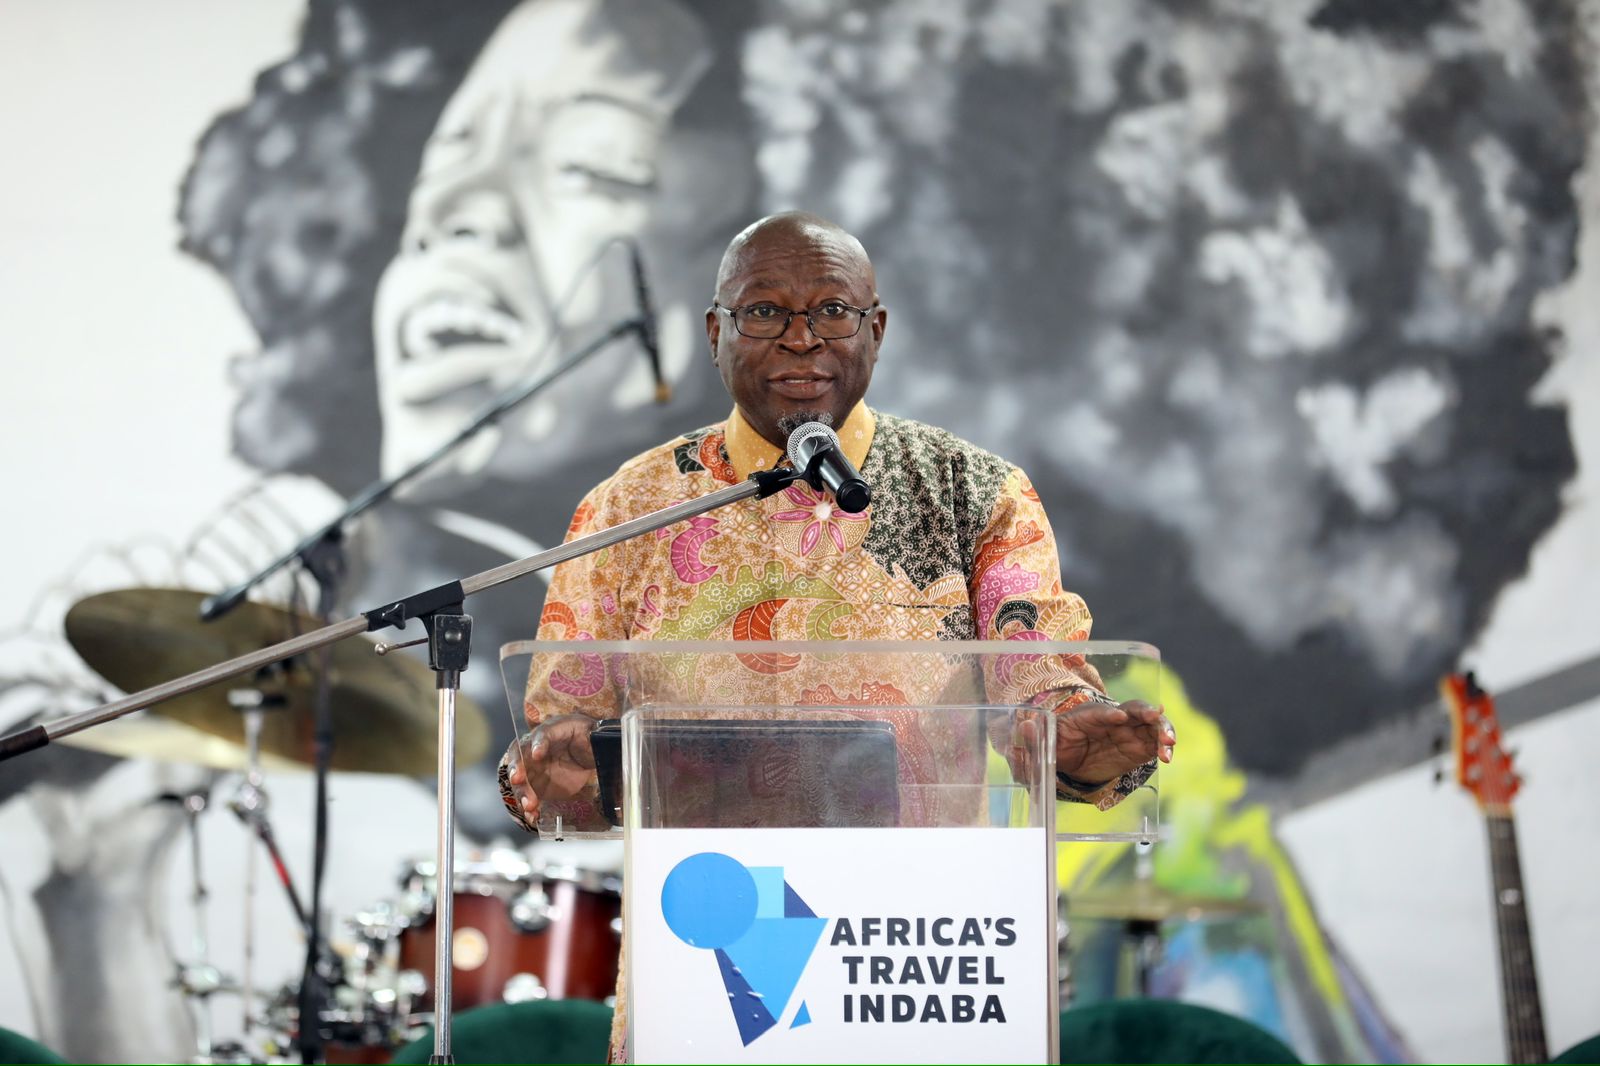 Speaker notes for Deputy Minister of Tourism, Fish Mahlalela on the occasion of the 2024 Africa's Travel Indaba Media Launch